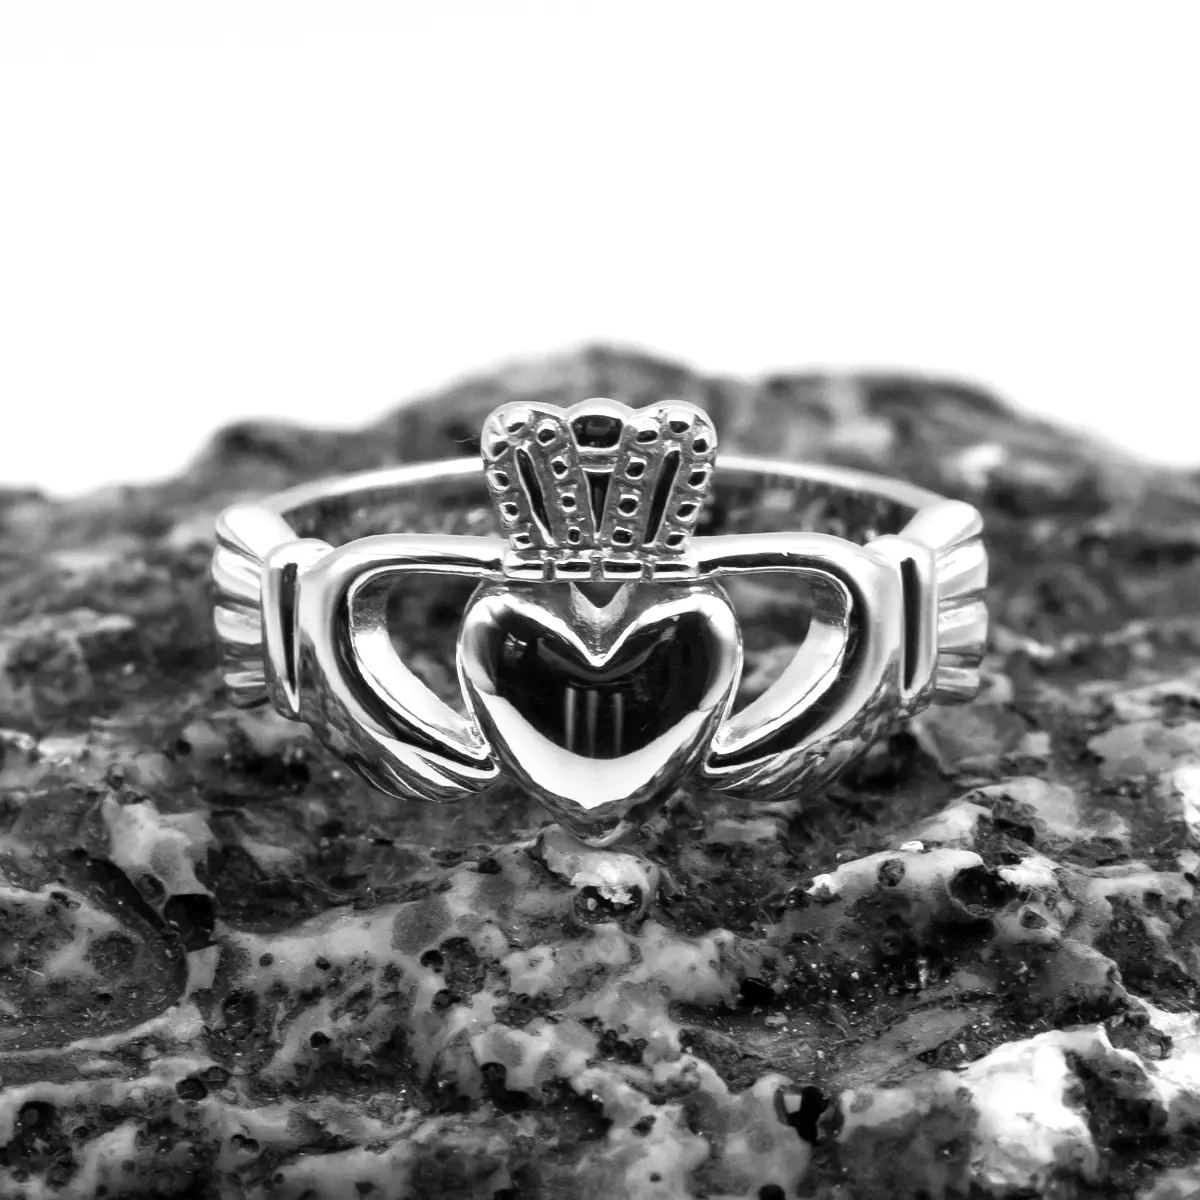 Gents Irish Claddagh Ring in Sterling Silver